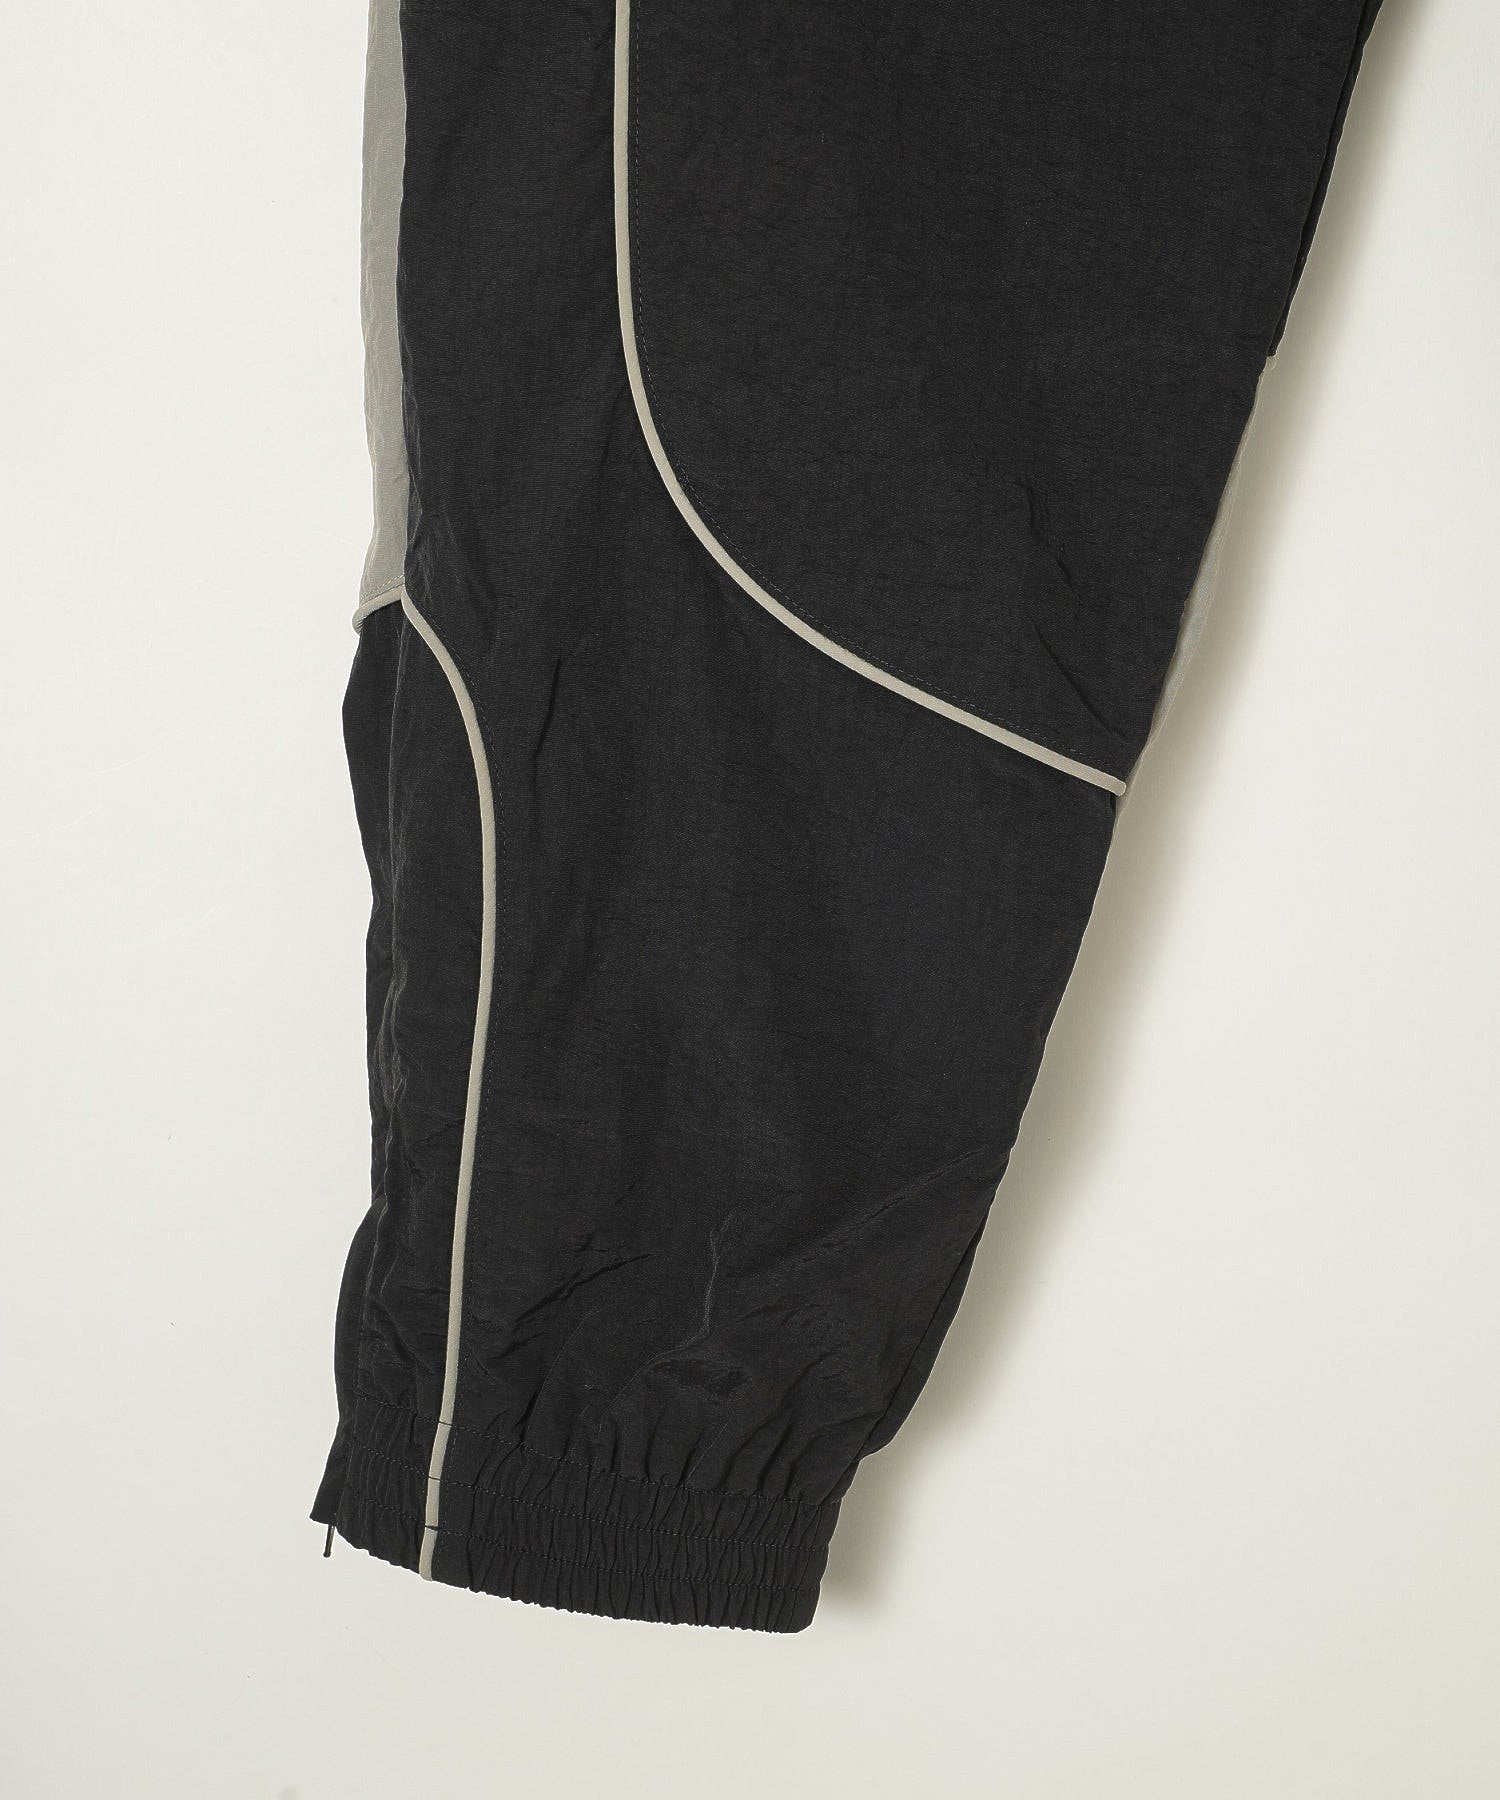 PERKS AND MINI/パークスアンドミニ/TRACKTION PANELLED TRACK PANT/8532